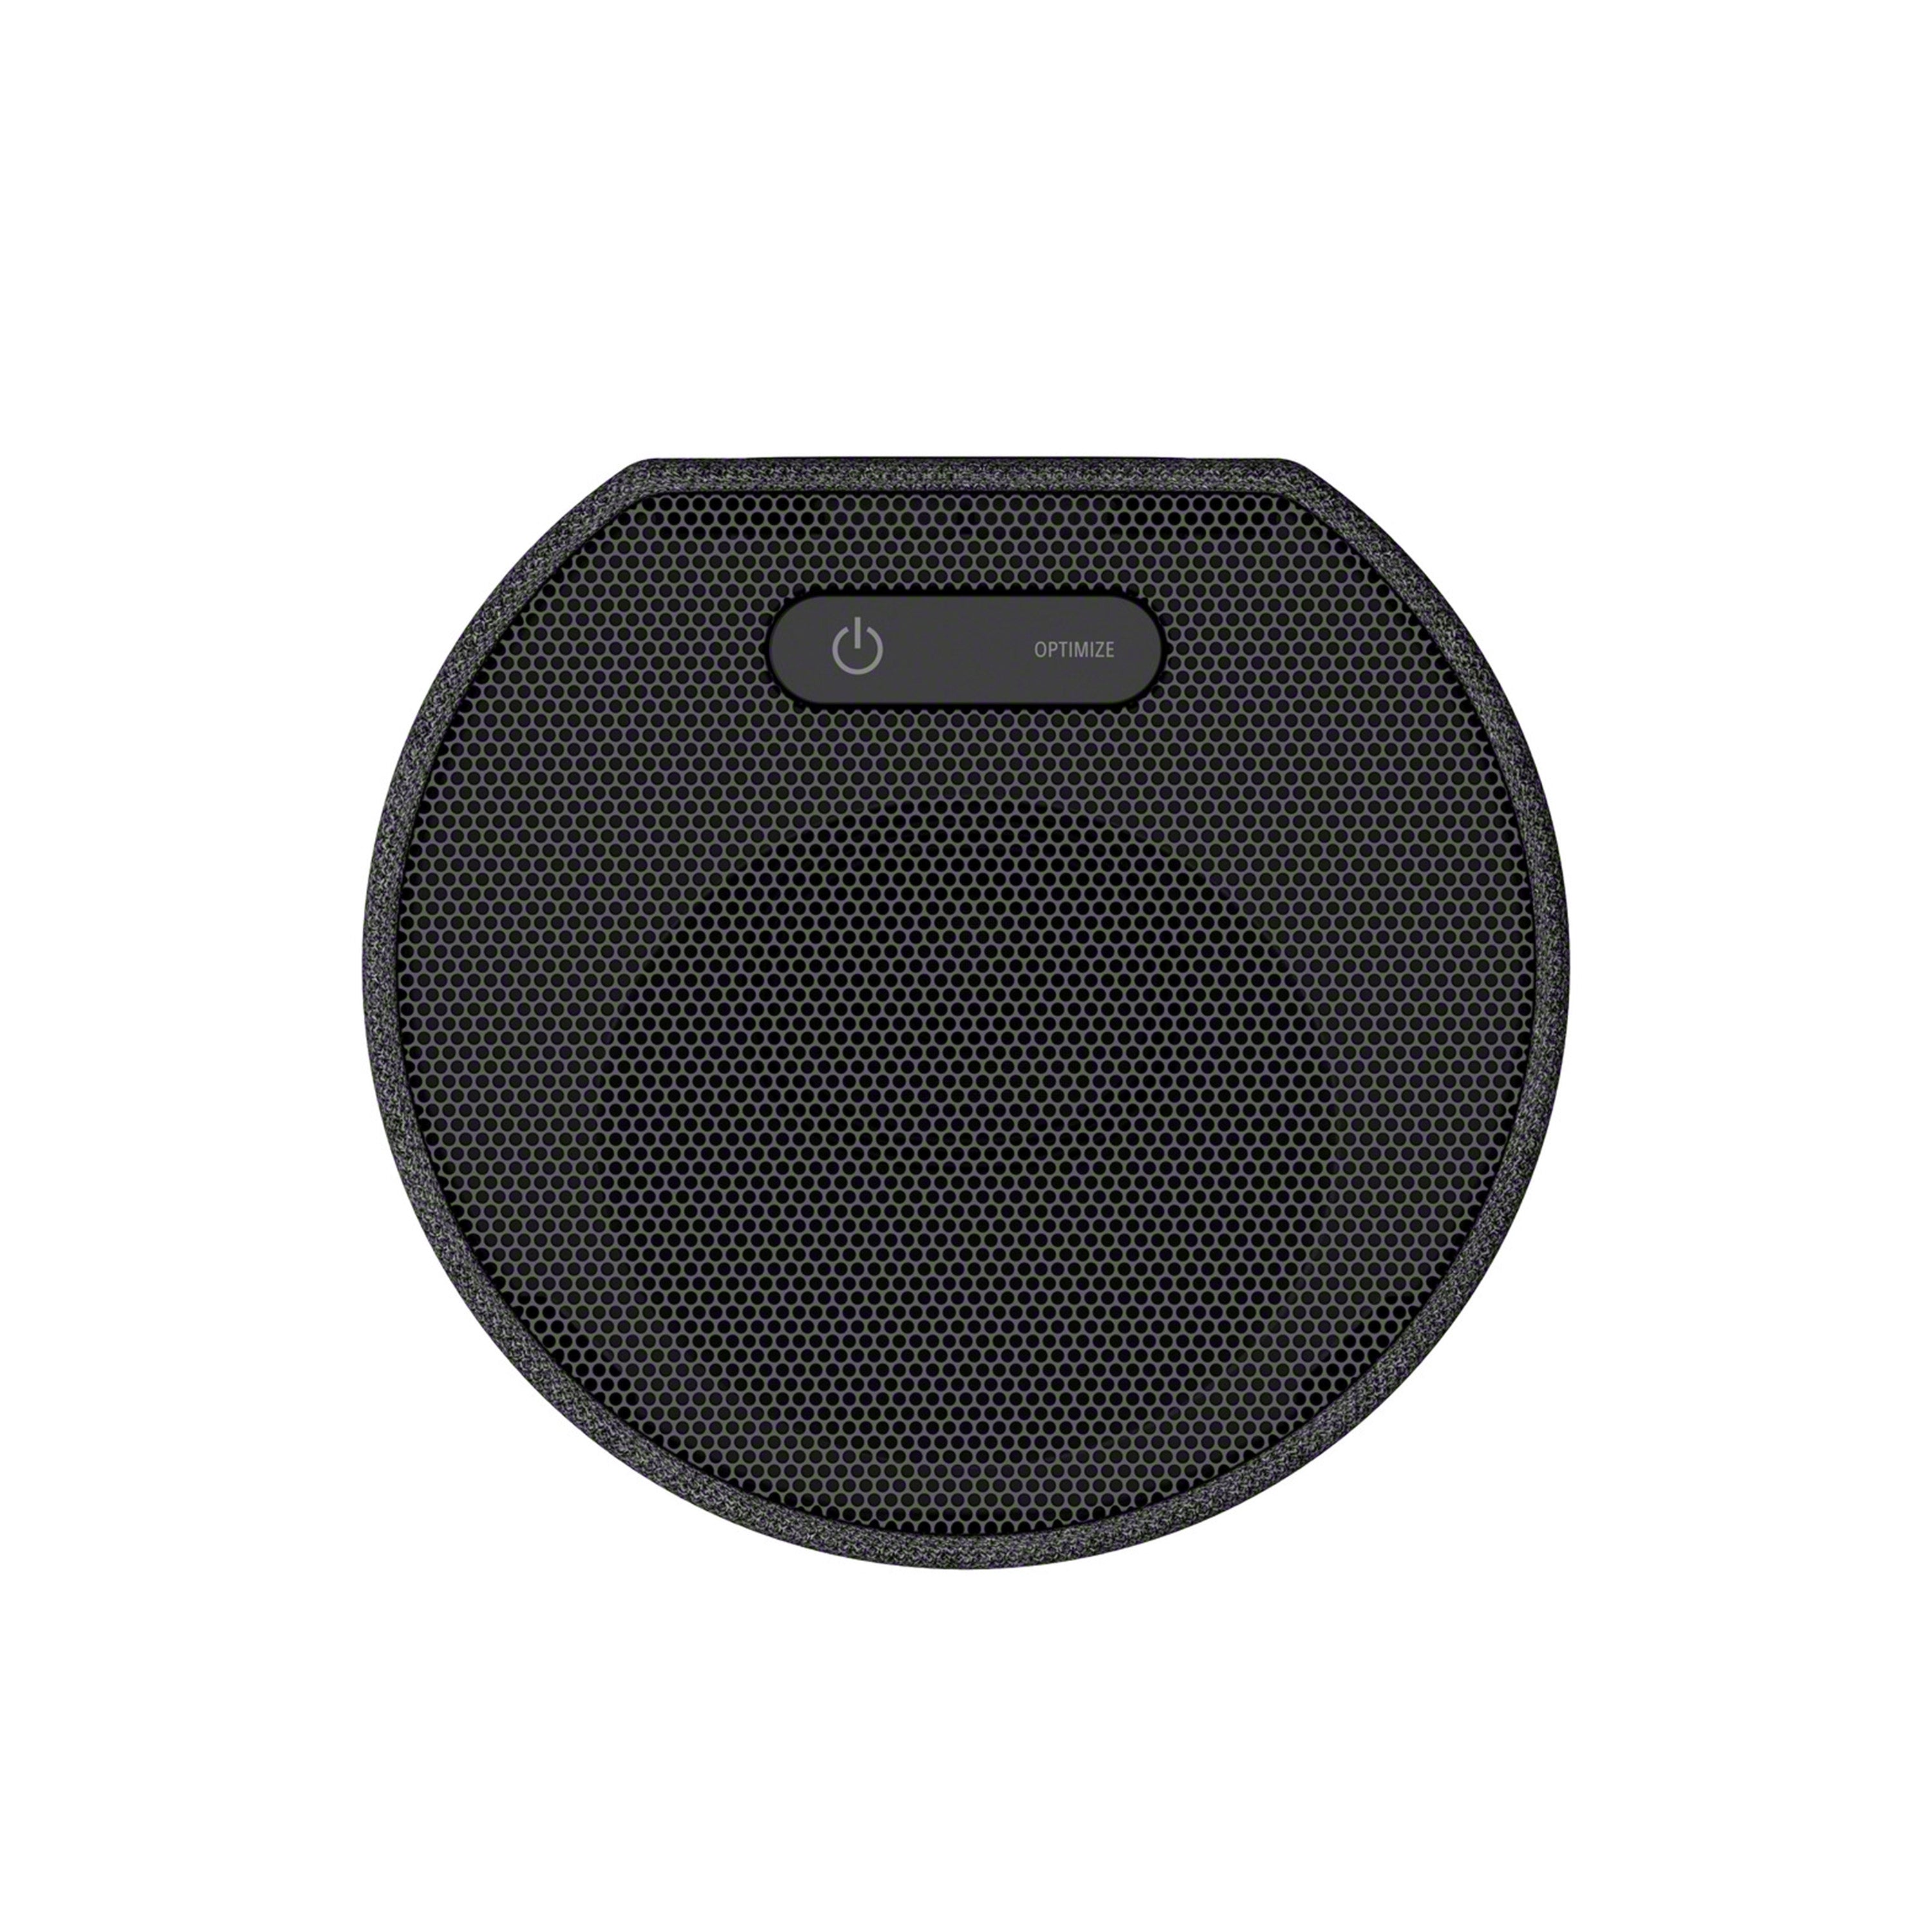 SA-RS5 Wireless Rear Speakers with Built-in Battery for HT-A7000/HT-A500